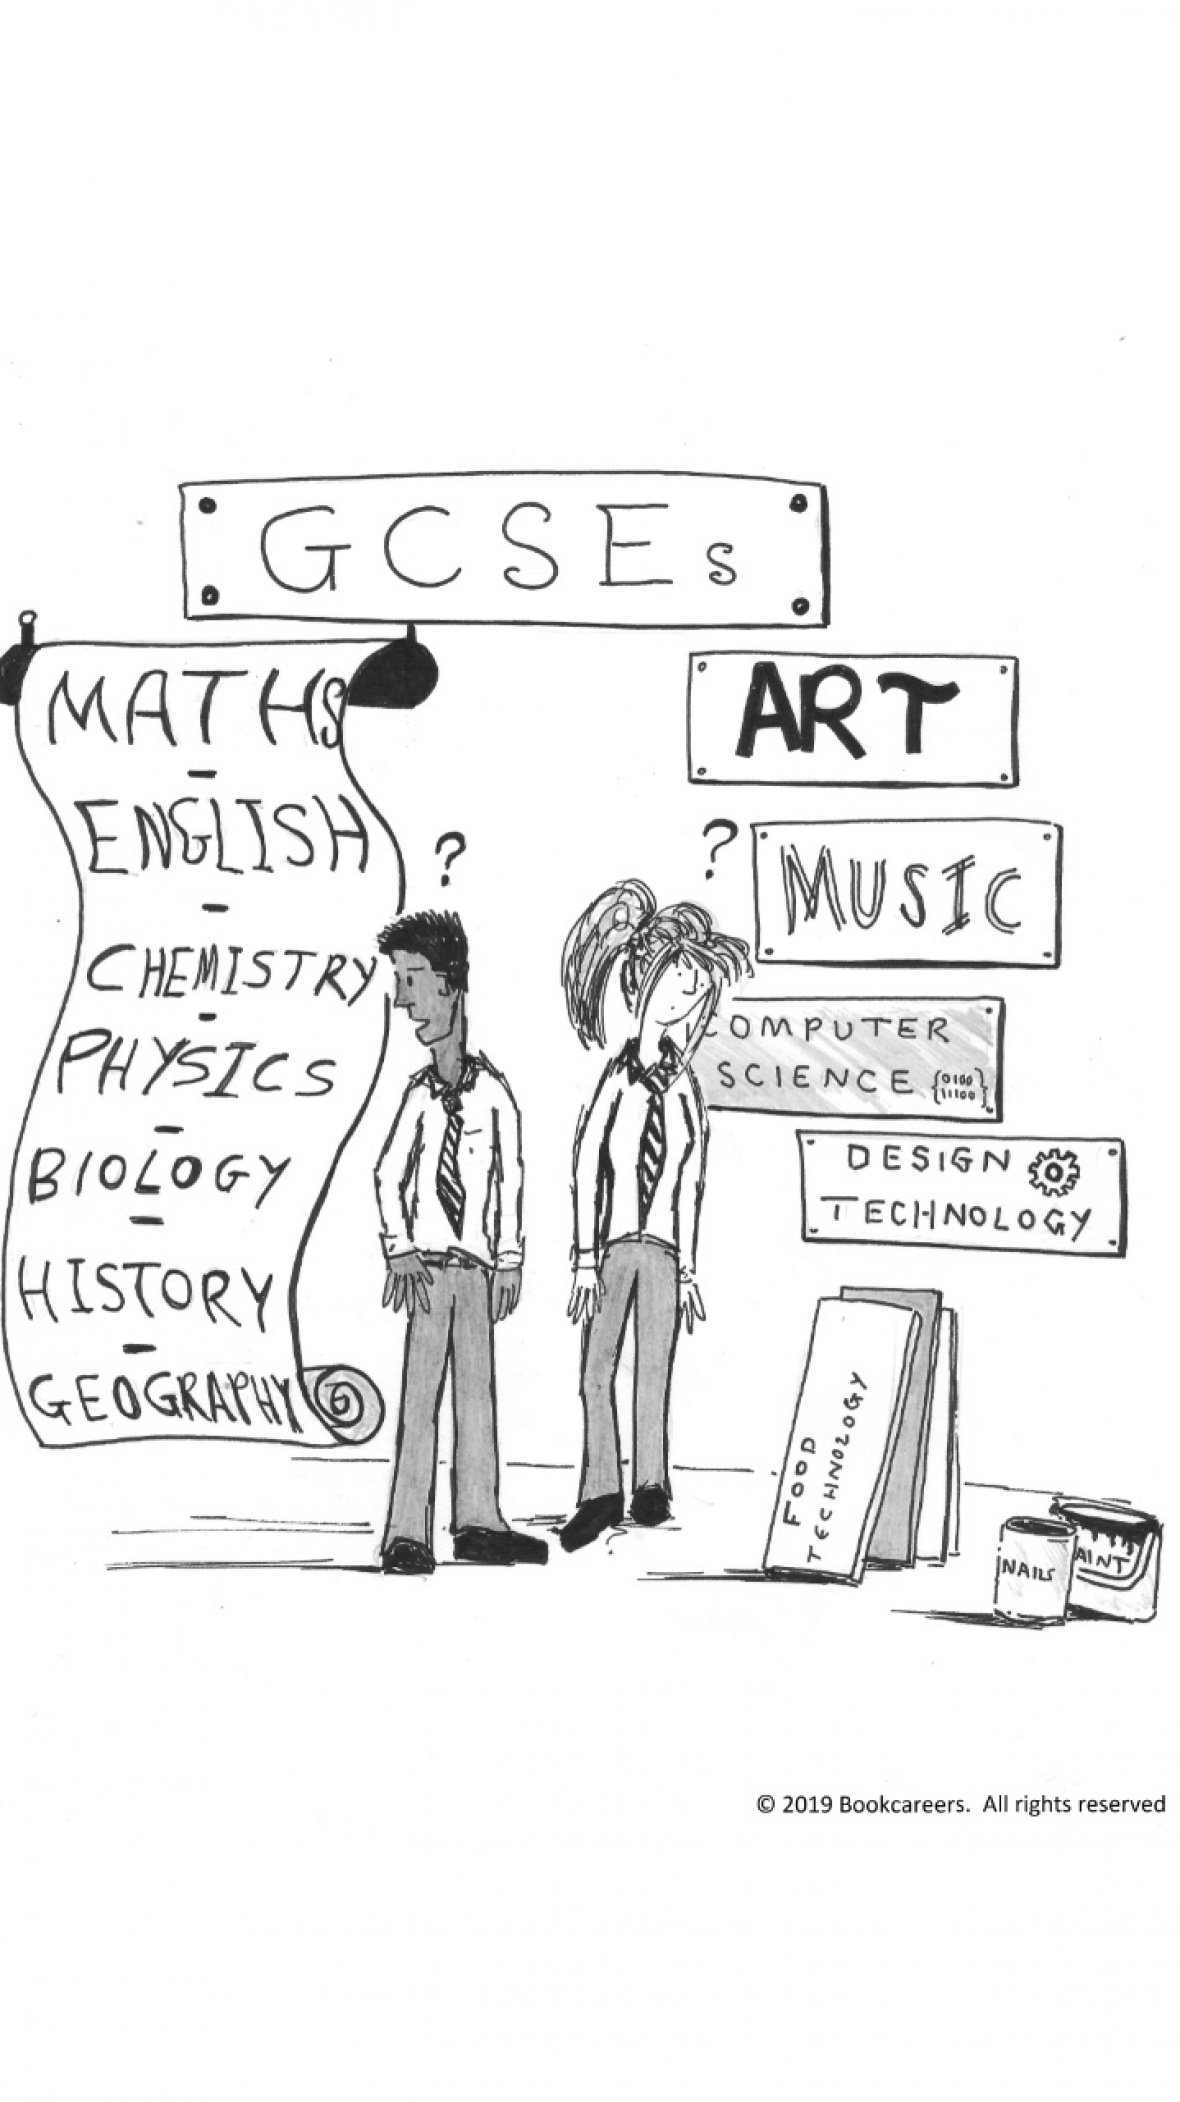 GCSE grading in Northern Ireland has changed.